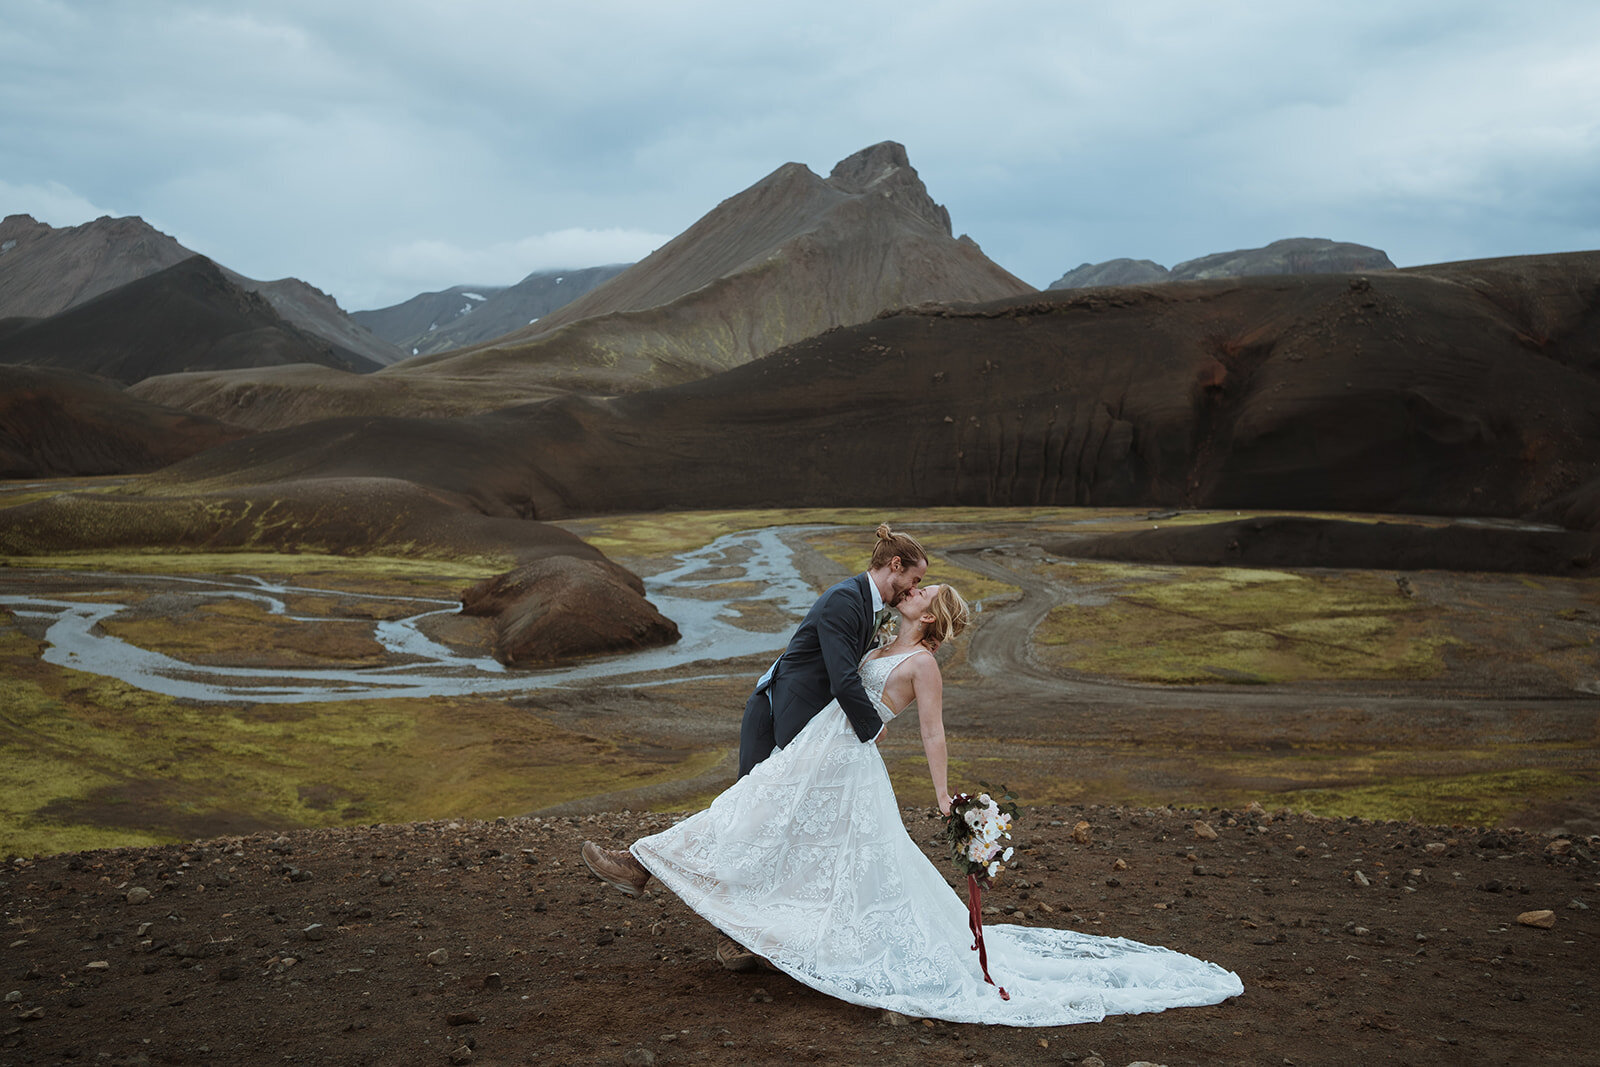 the groom is dipping the bride for their first kiss. she has her hand outstretched with flowers. The groom is holding her by the waist and they are overlooking the mountains behind them.